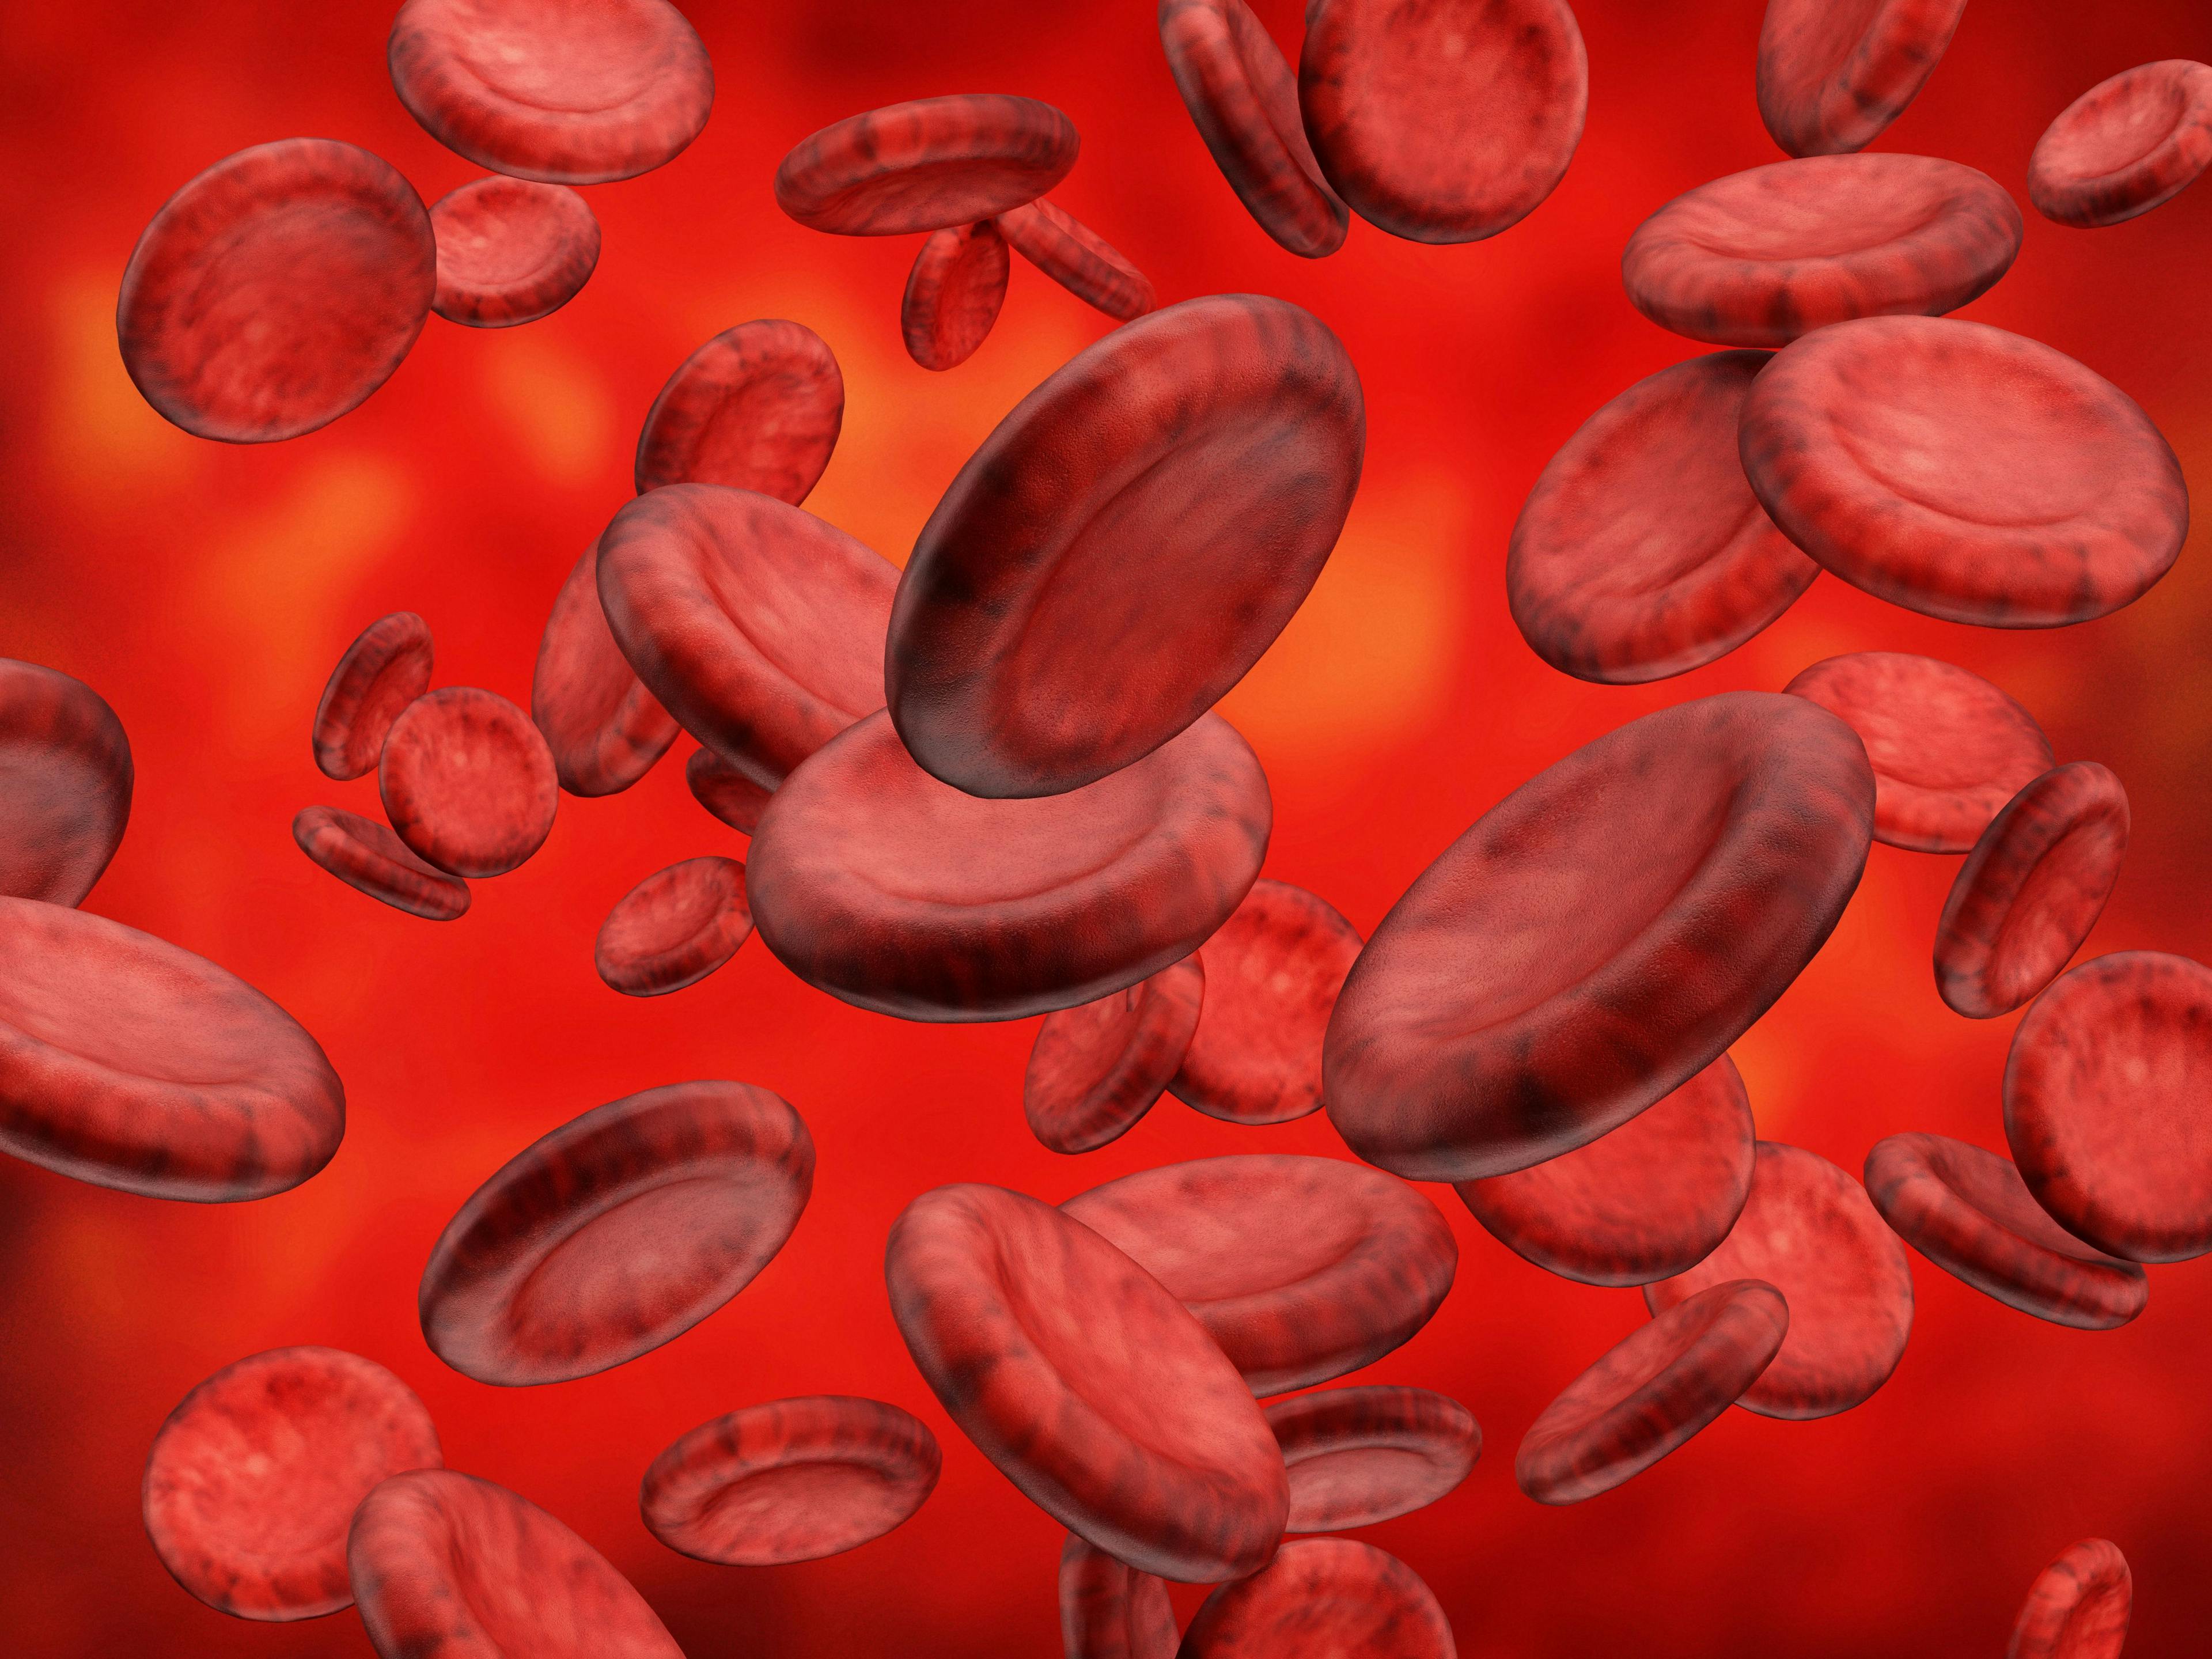 DAPT De-Escalation 30 Days After PCI Could Reduce Ischemic, Bleeding Events